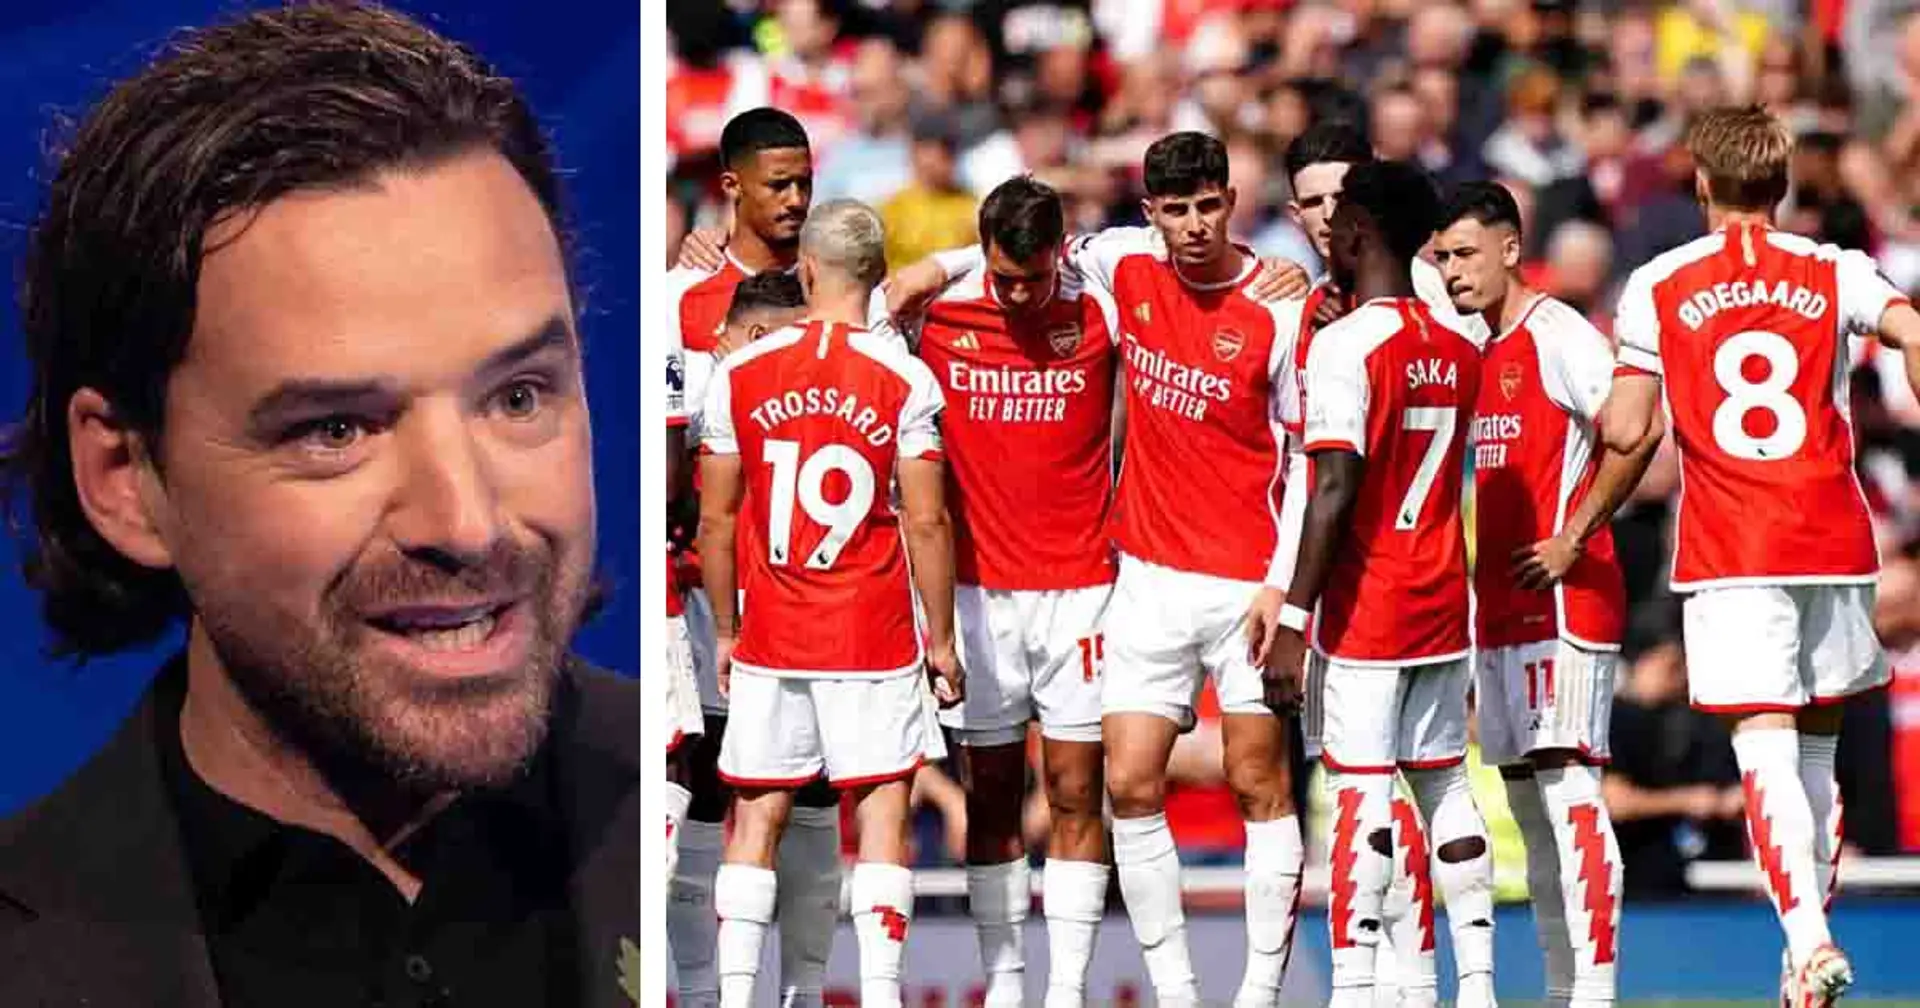 Arsenal told they have two players who can 'beat anyone in the world'